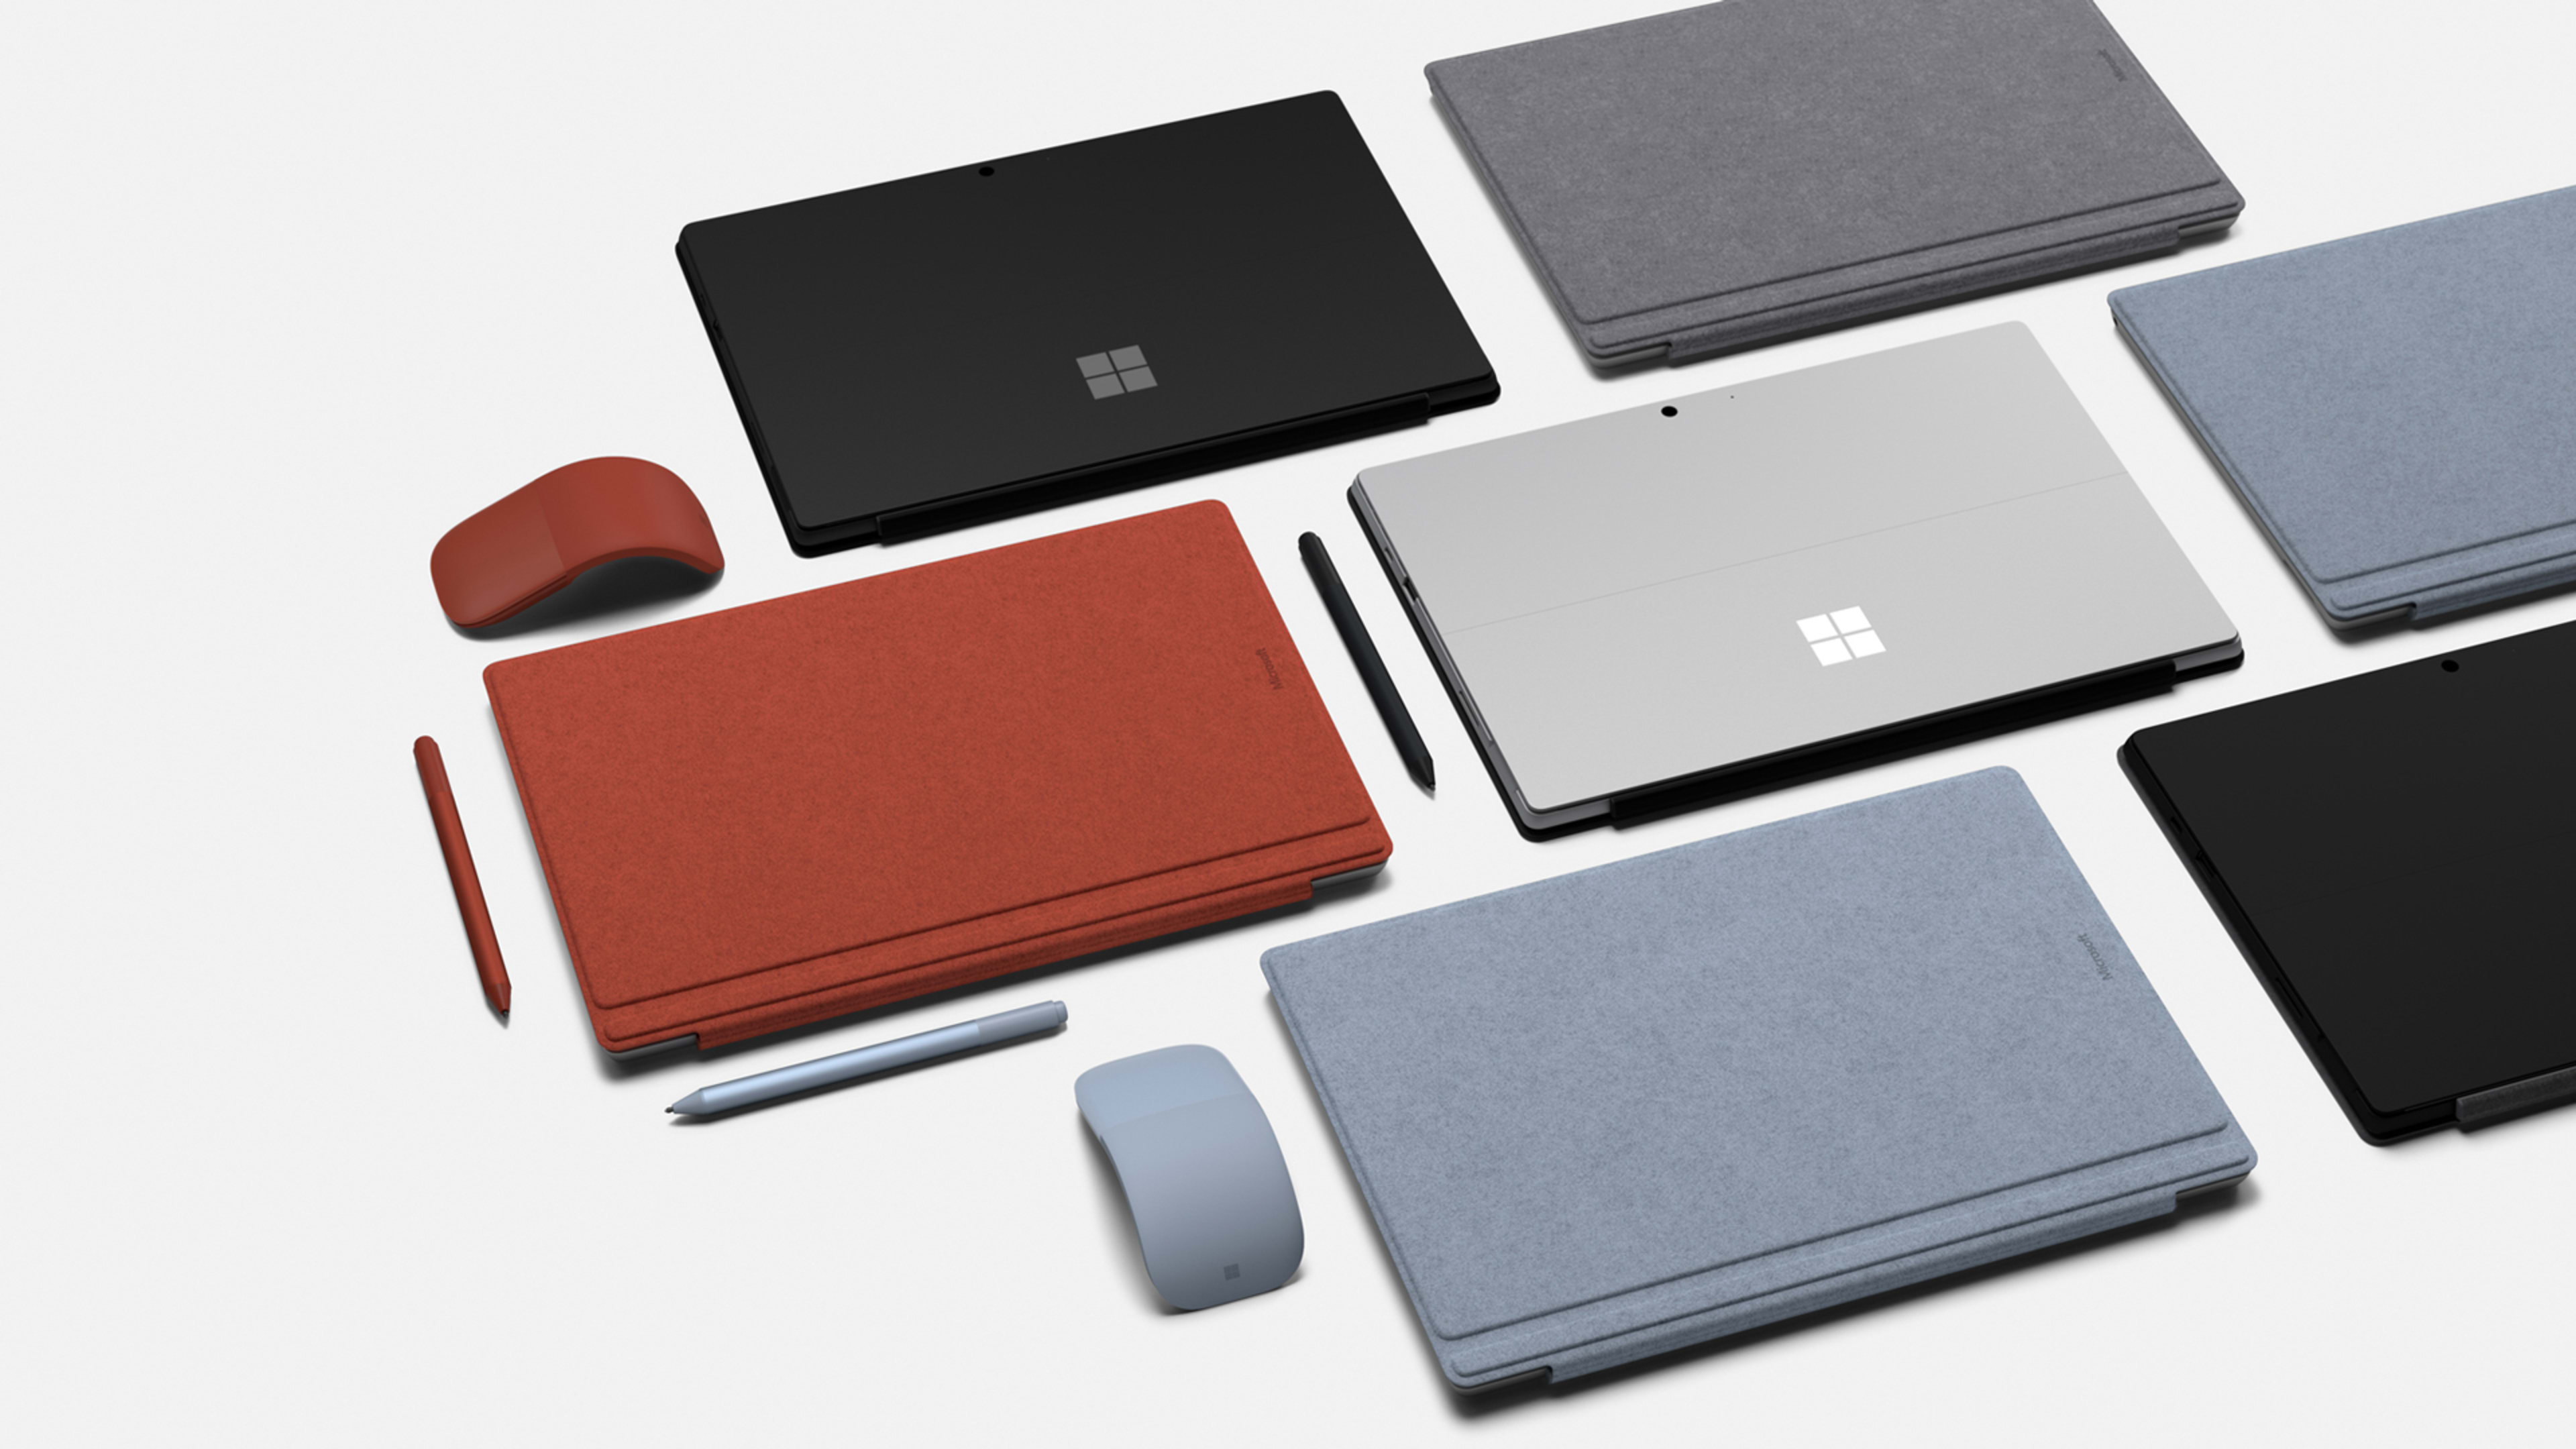 Sorry, pundits: Microsoft cares more about Surface than ever